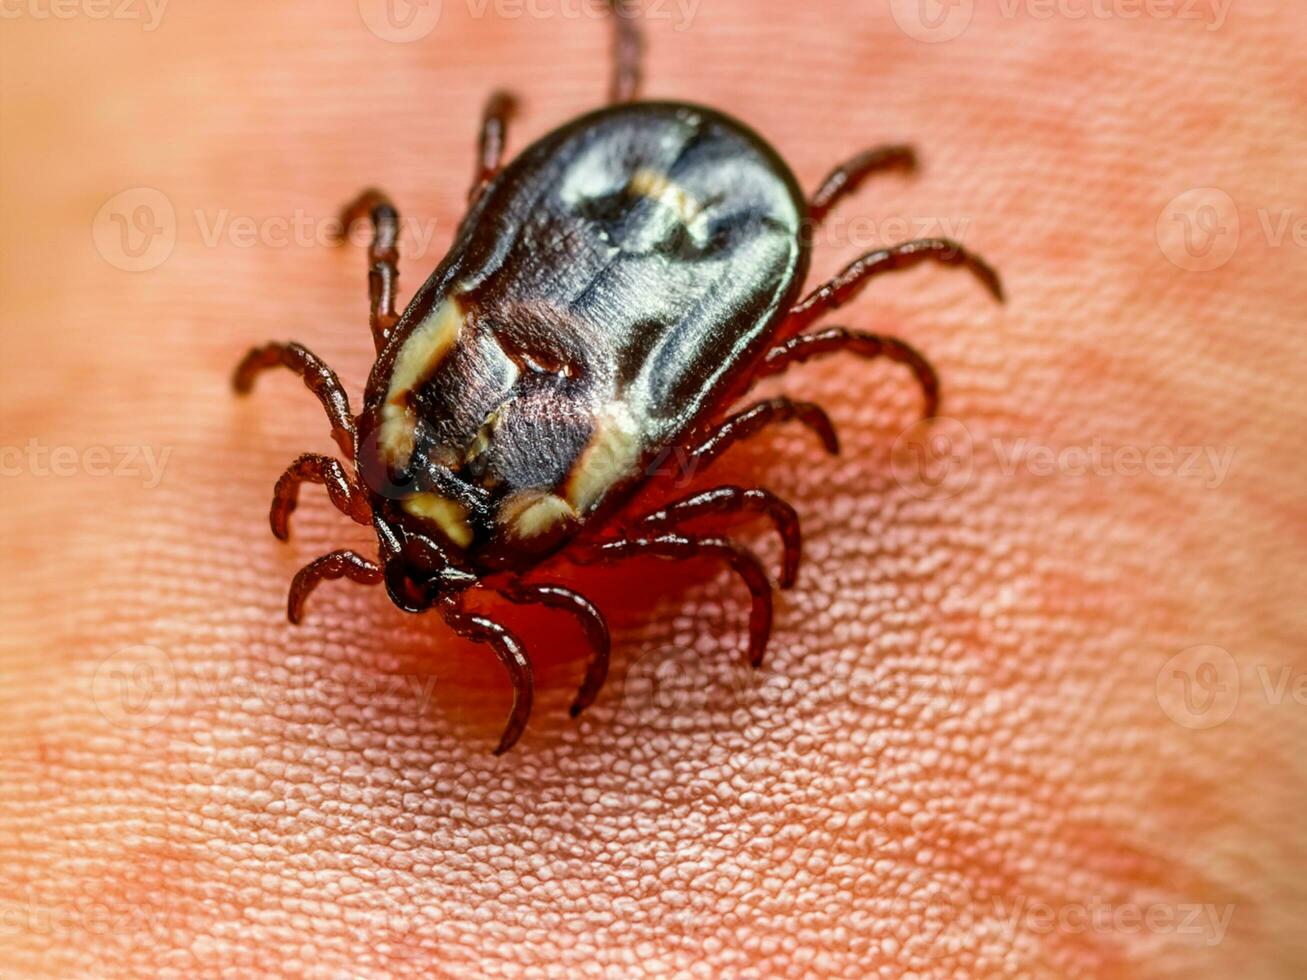 close up of red tick with blood. macro shot of human hand with tick. photo